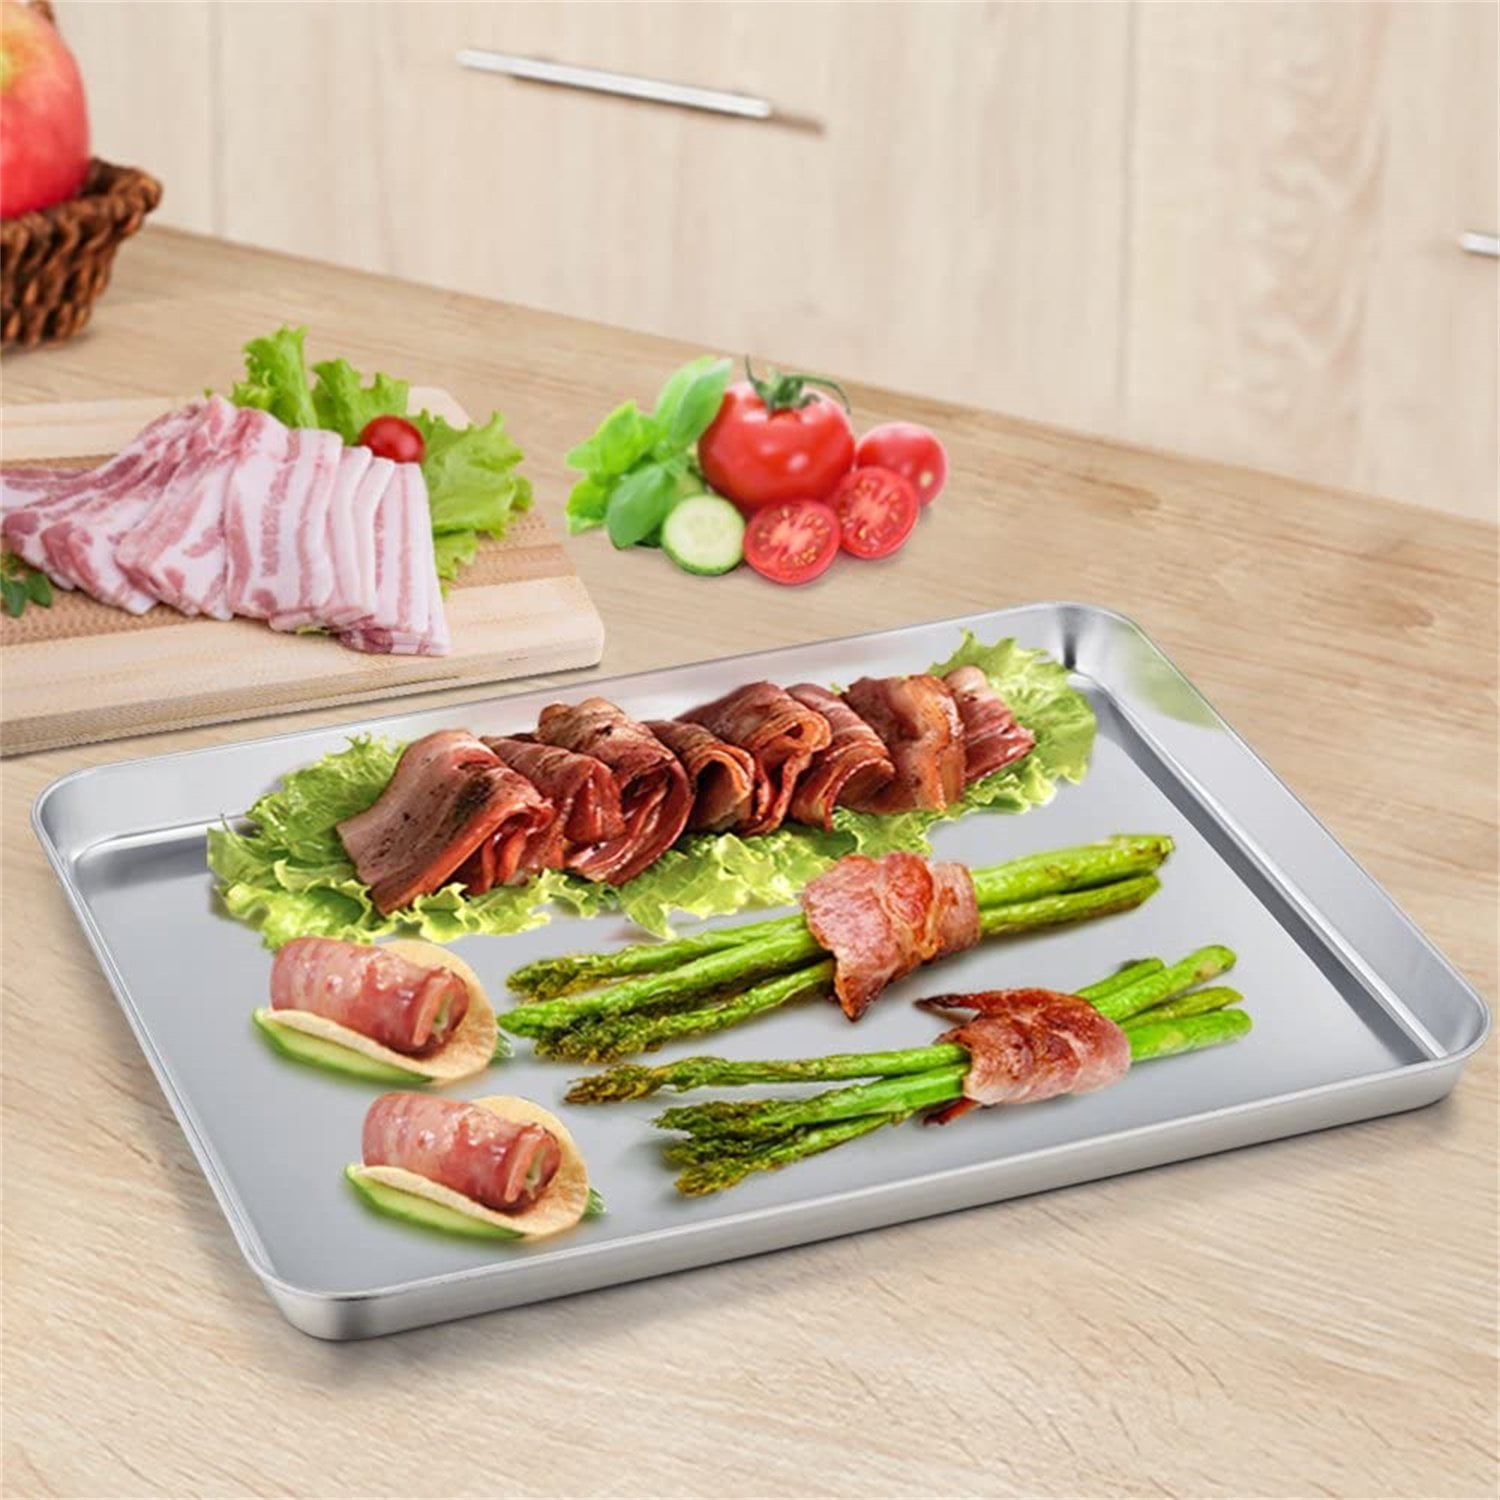 Duslogis Oven Tray, Stainless Steel Baking Tray, 12x9.4x1 in, Non Toxic &  Healthy, Mirror Finish & Rust Free, Easy Clean & Dishwasher Safe